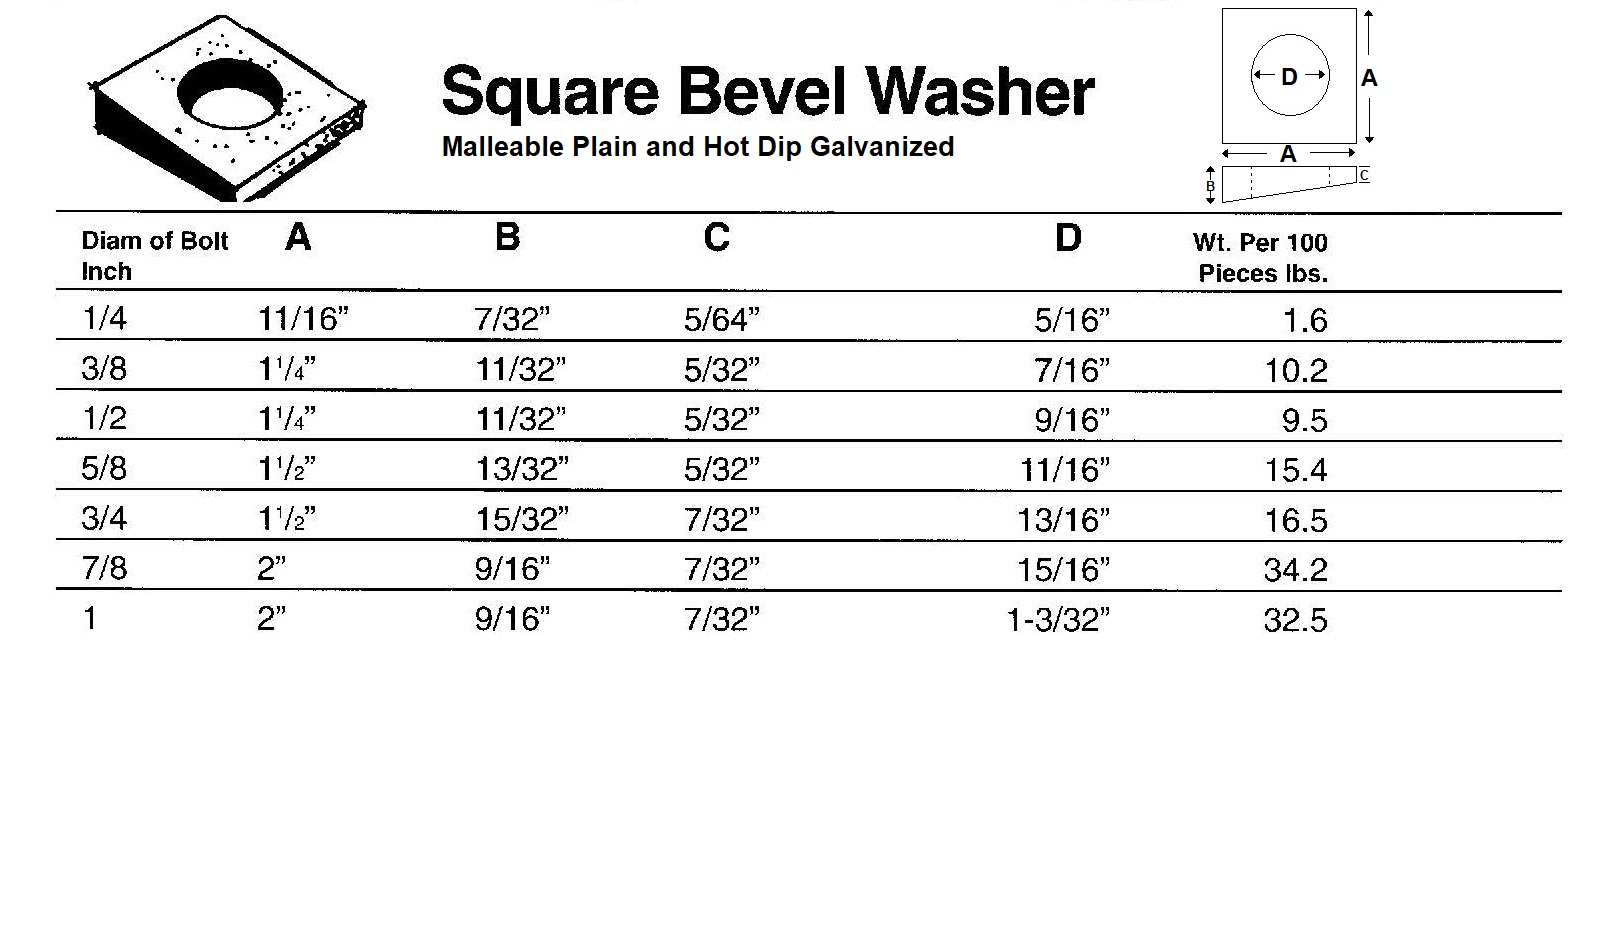 BEVEL WASHER DIMENSIONS